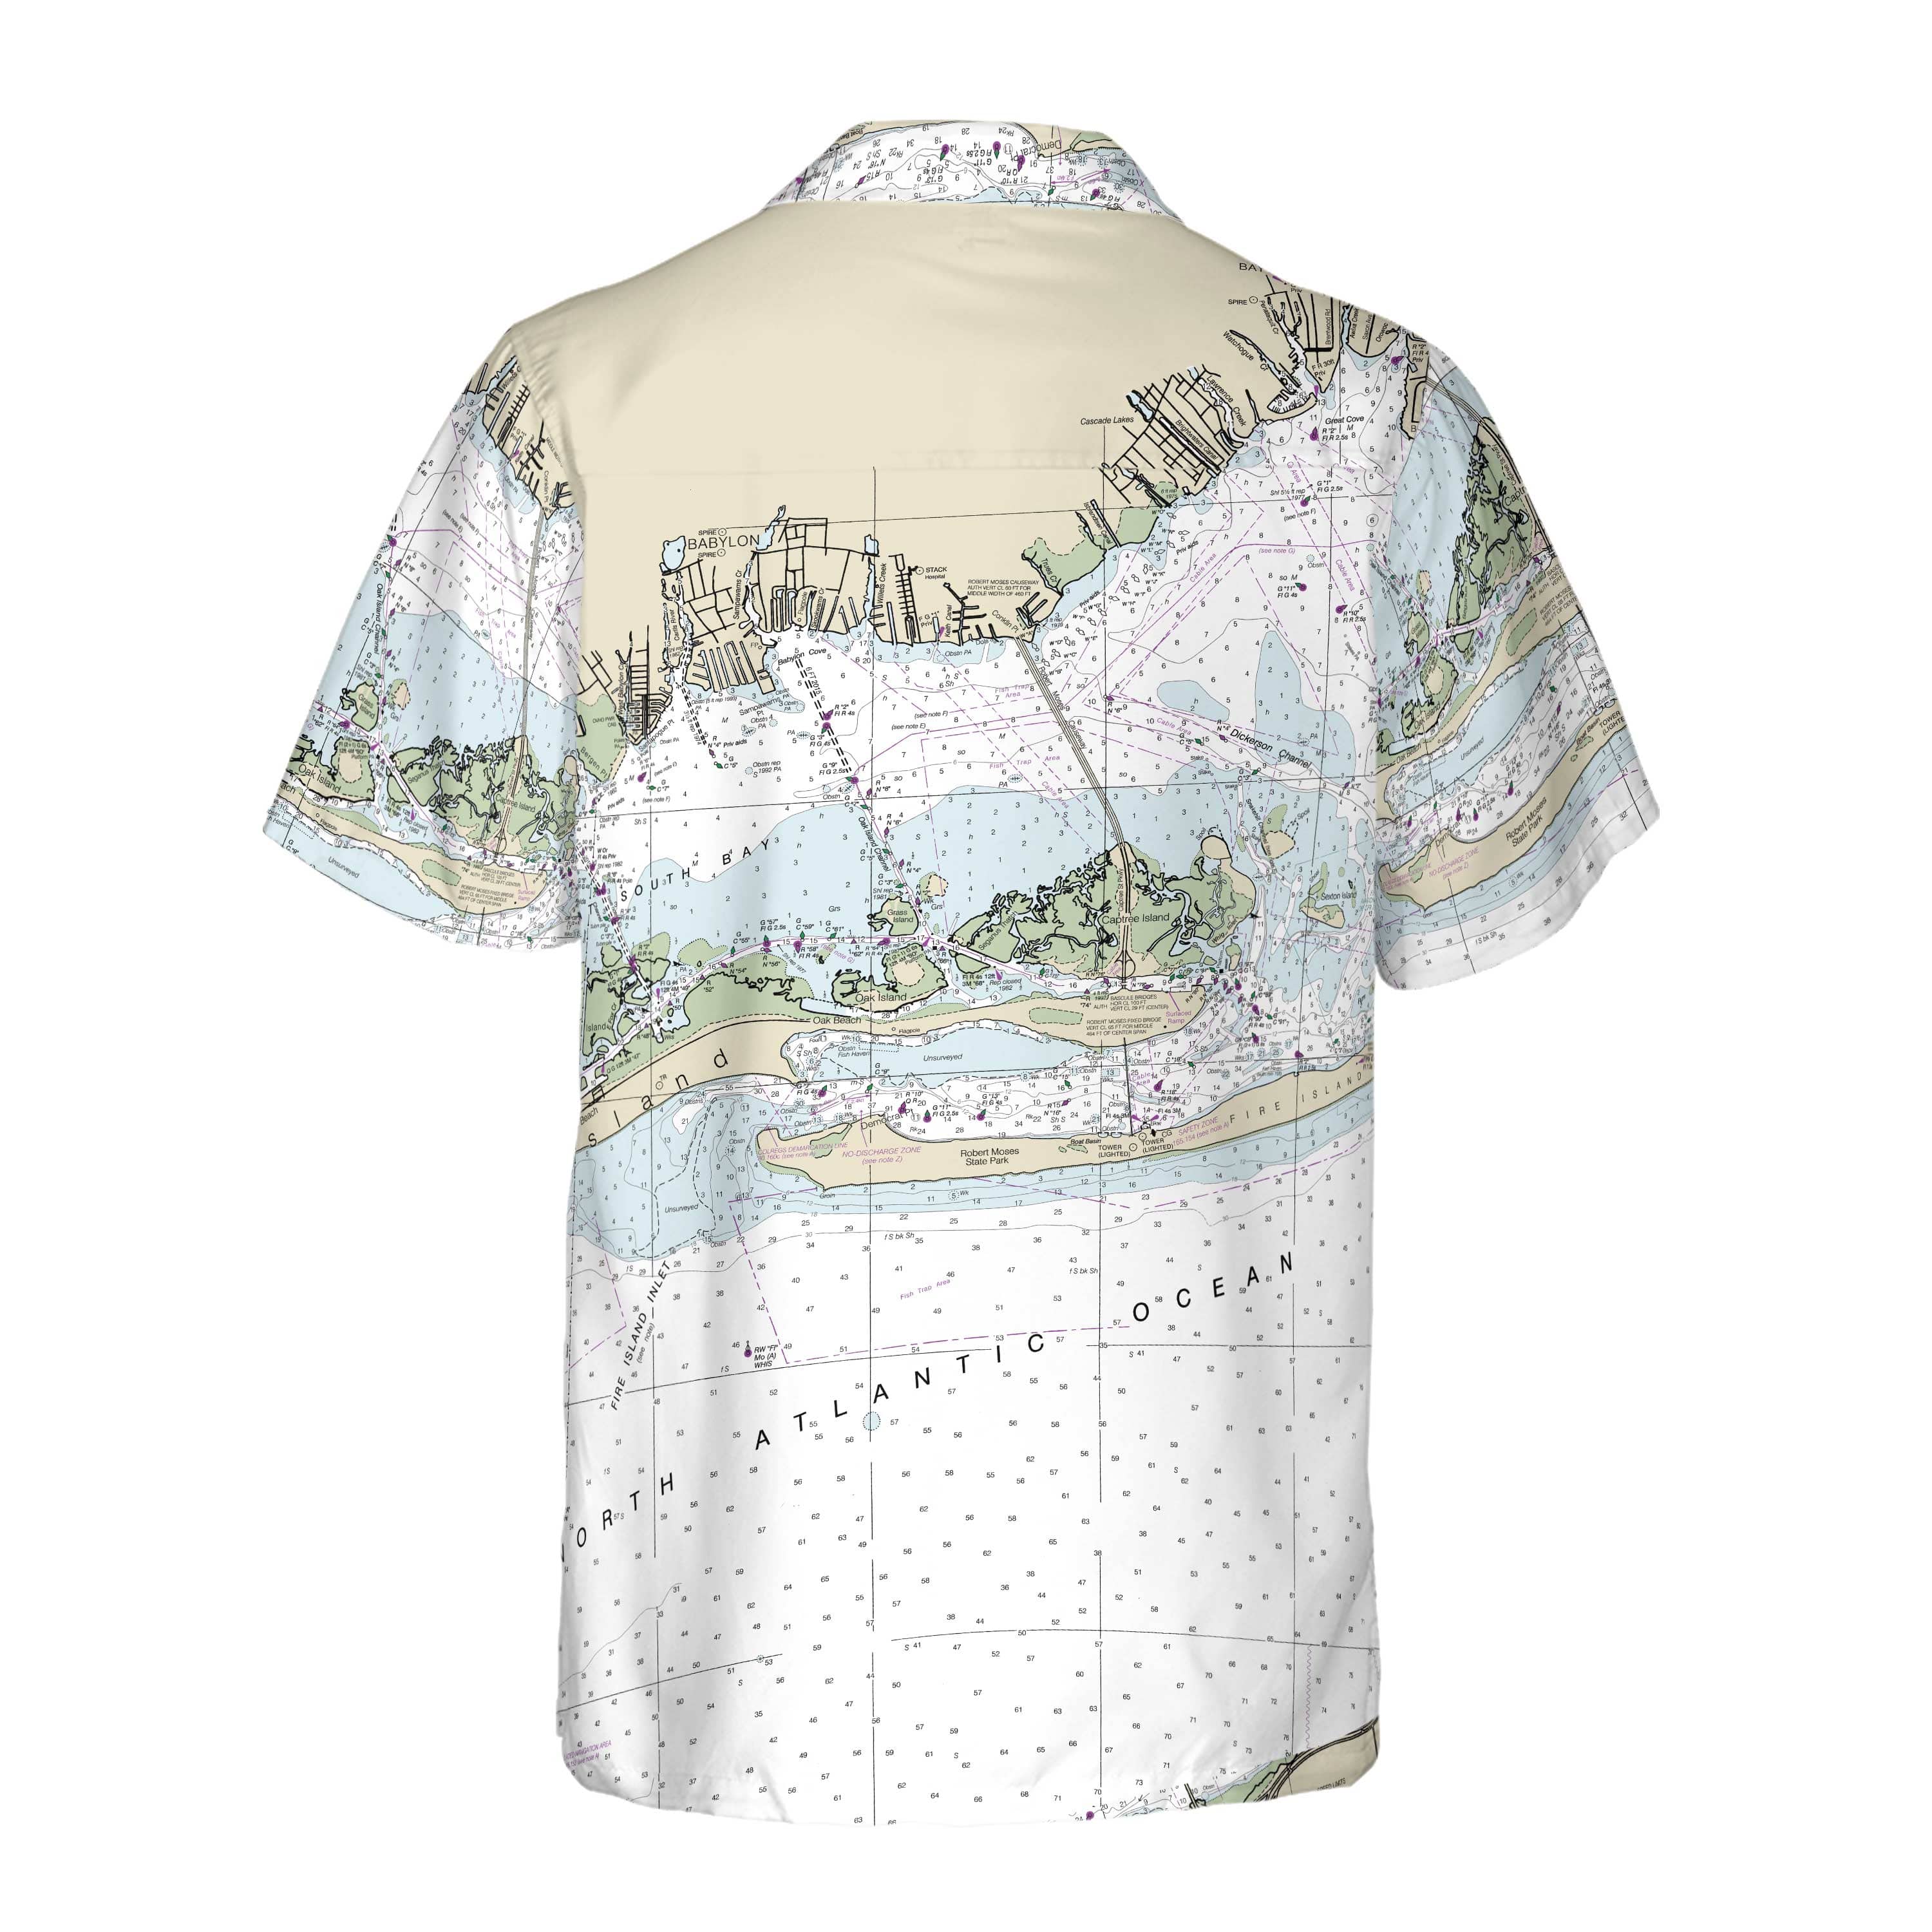 The Fire Island Inlet Coconut Button Camp Shirt